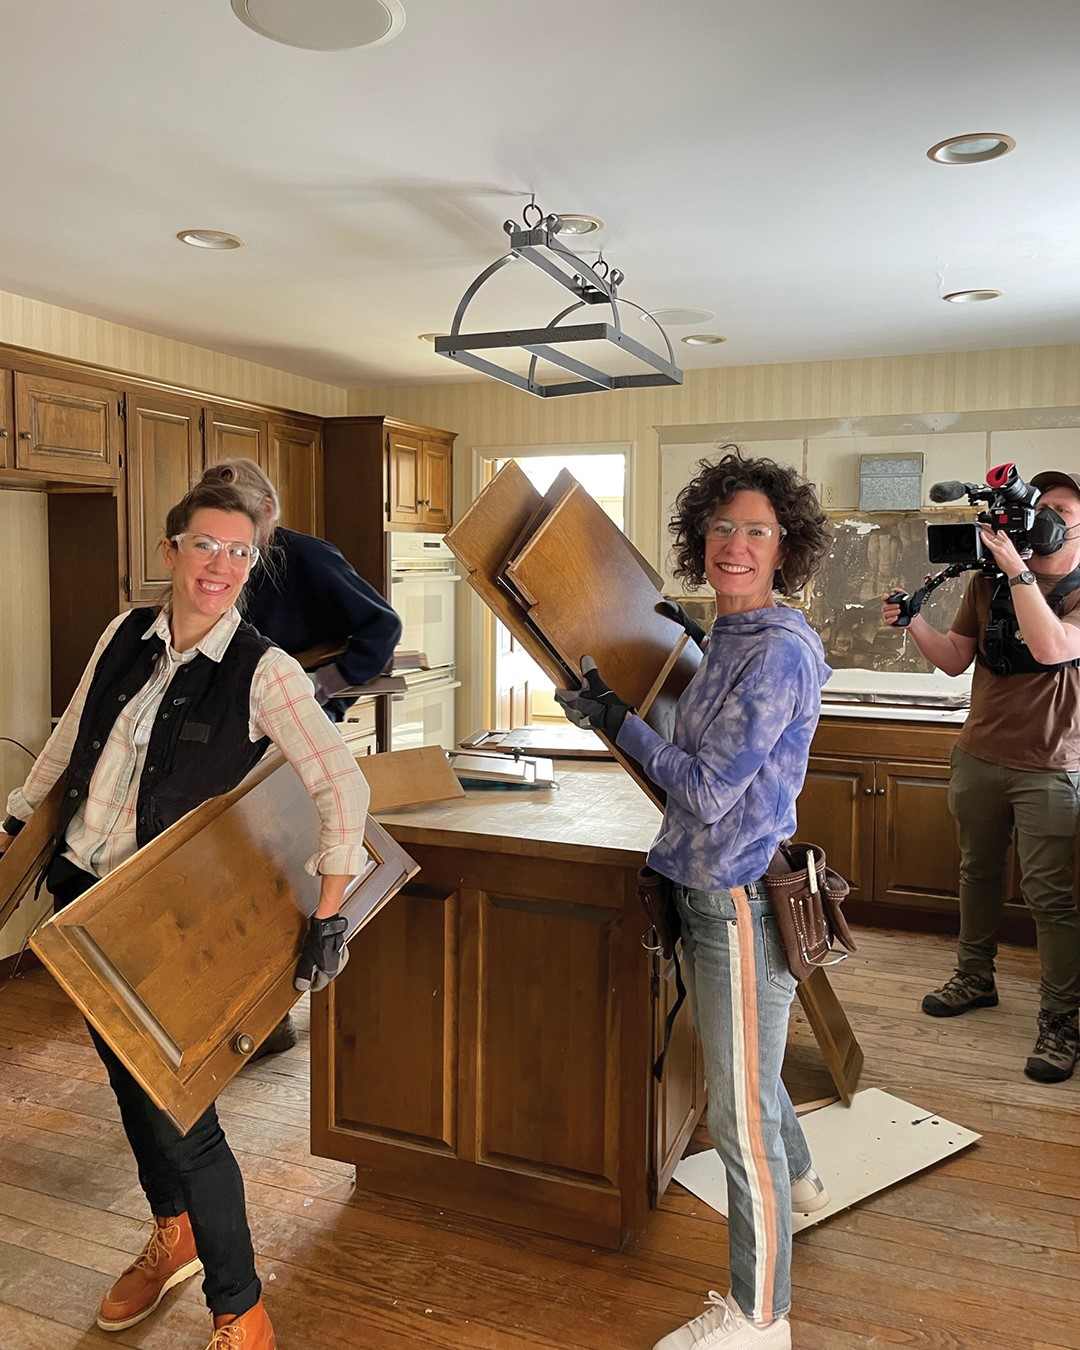 Kirsten Meehan and Lindsey Uselding filming an episode about the home of their colleague and his wife, Ron and Sonia Ungerman. The home had ice dams that caused water damage throughout the house. Photo: Ungerman,